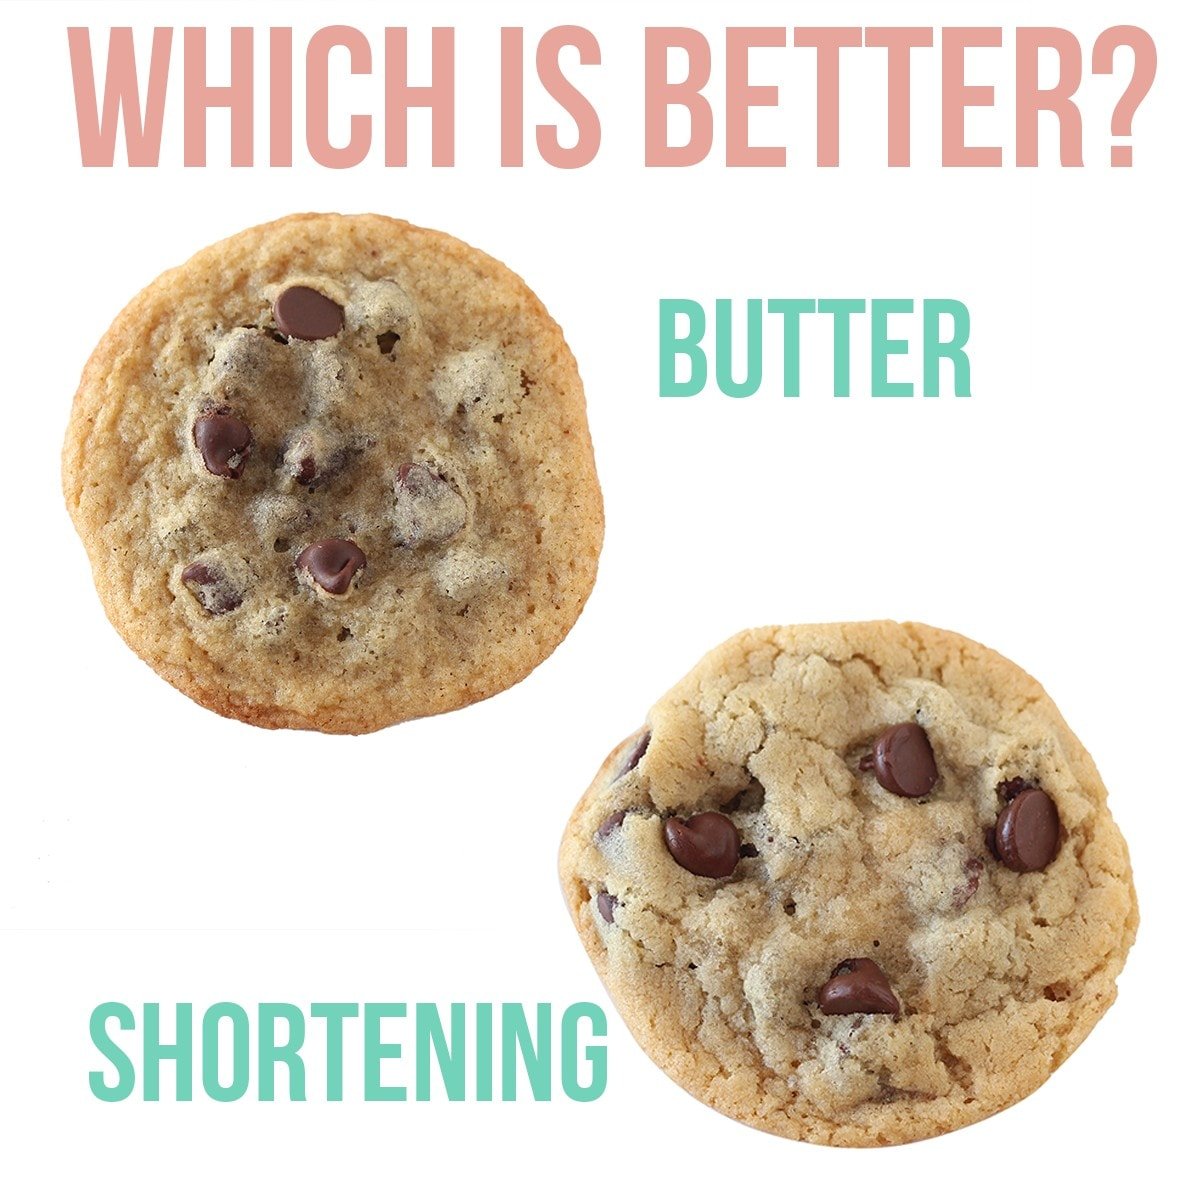 Butter vs Shortening, which is BETTER? The exact differences simply explained (video included) with side-by-side comparisons in cookies, biscuits, and pie crusts so you can SEE the difference.